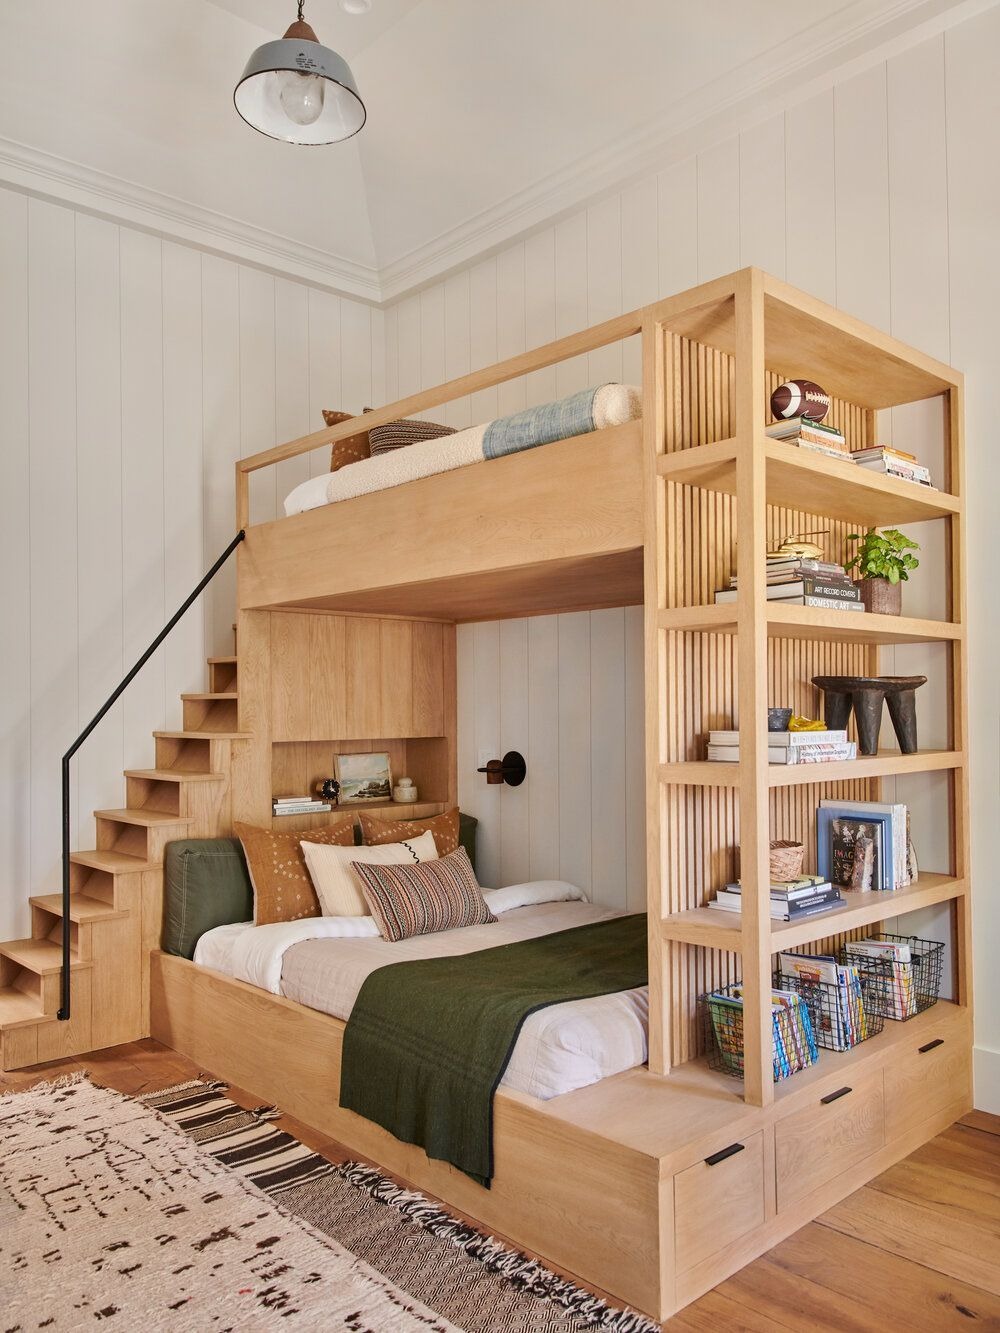 Round-up Bunk Bed with Storage and Bookshelf